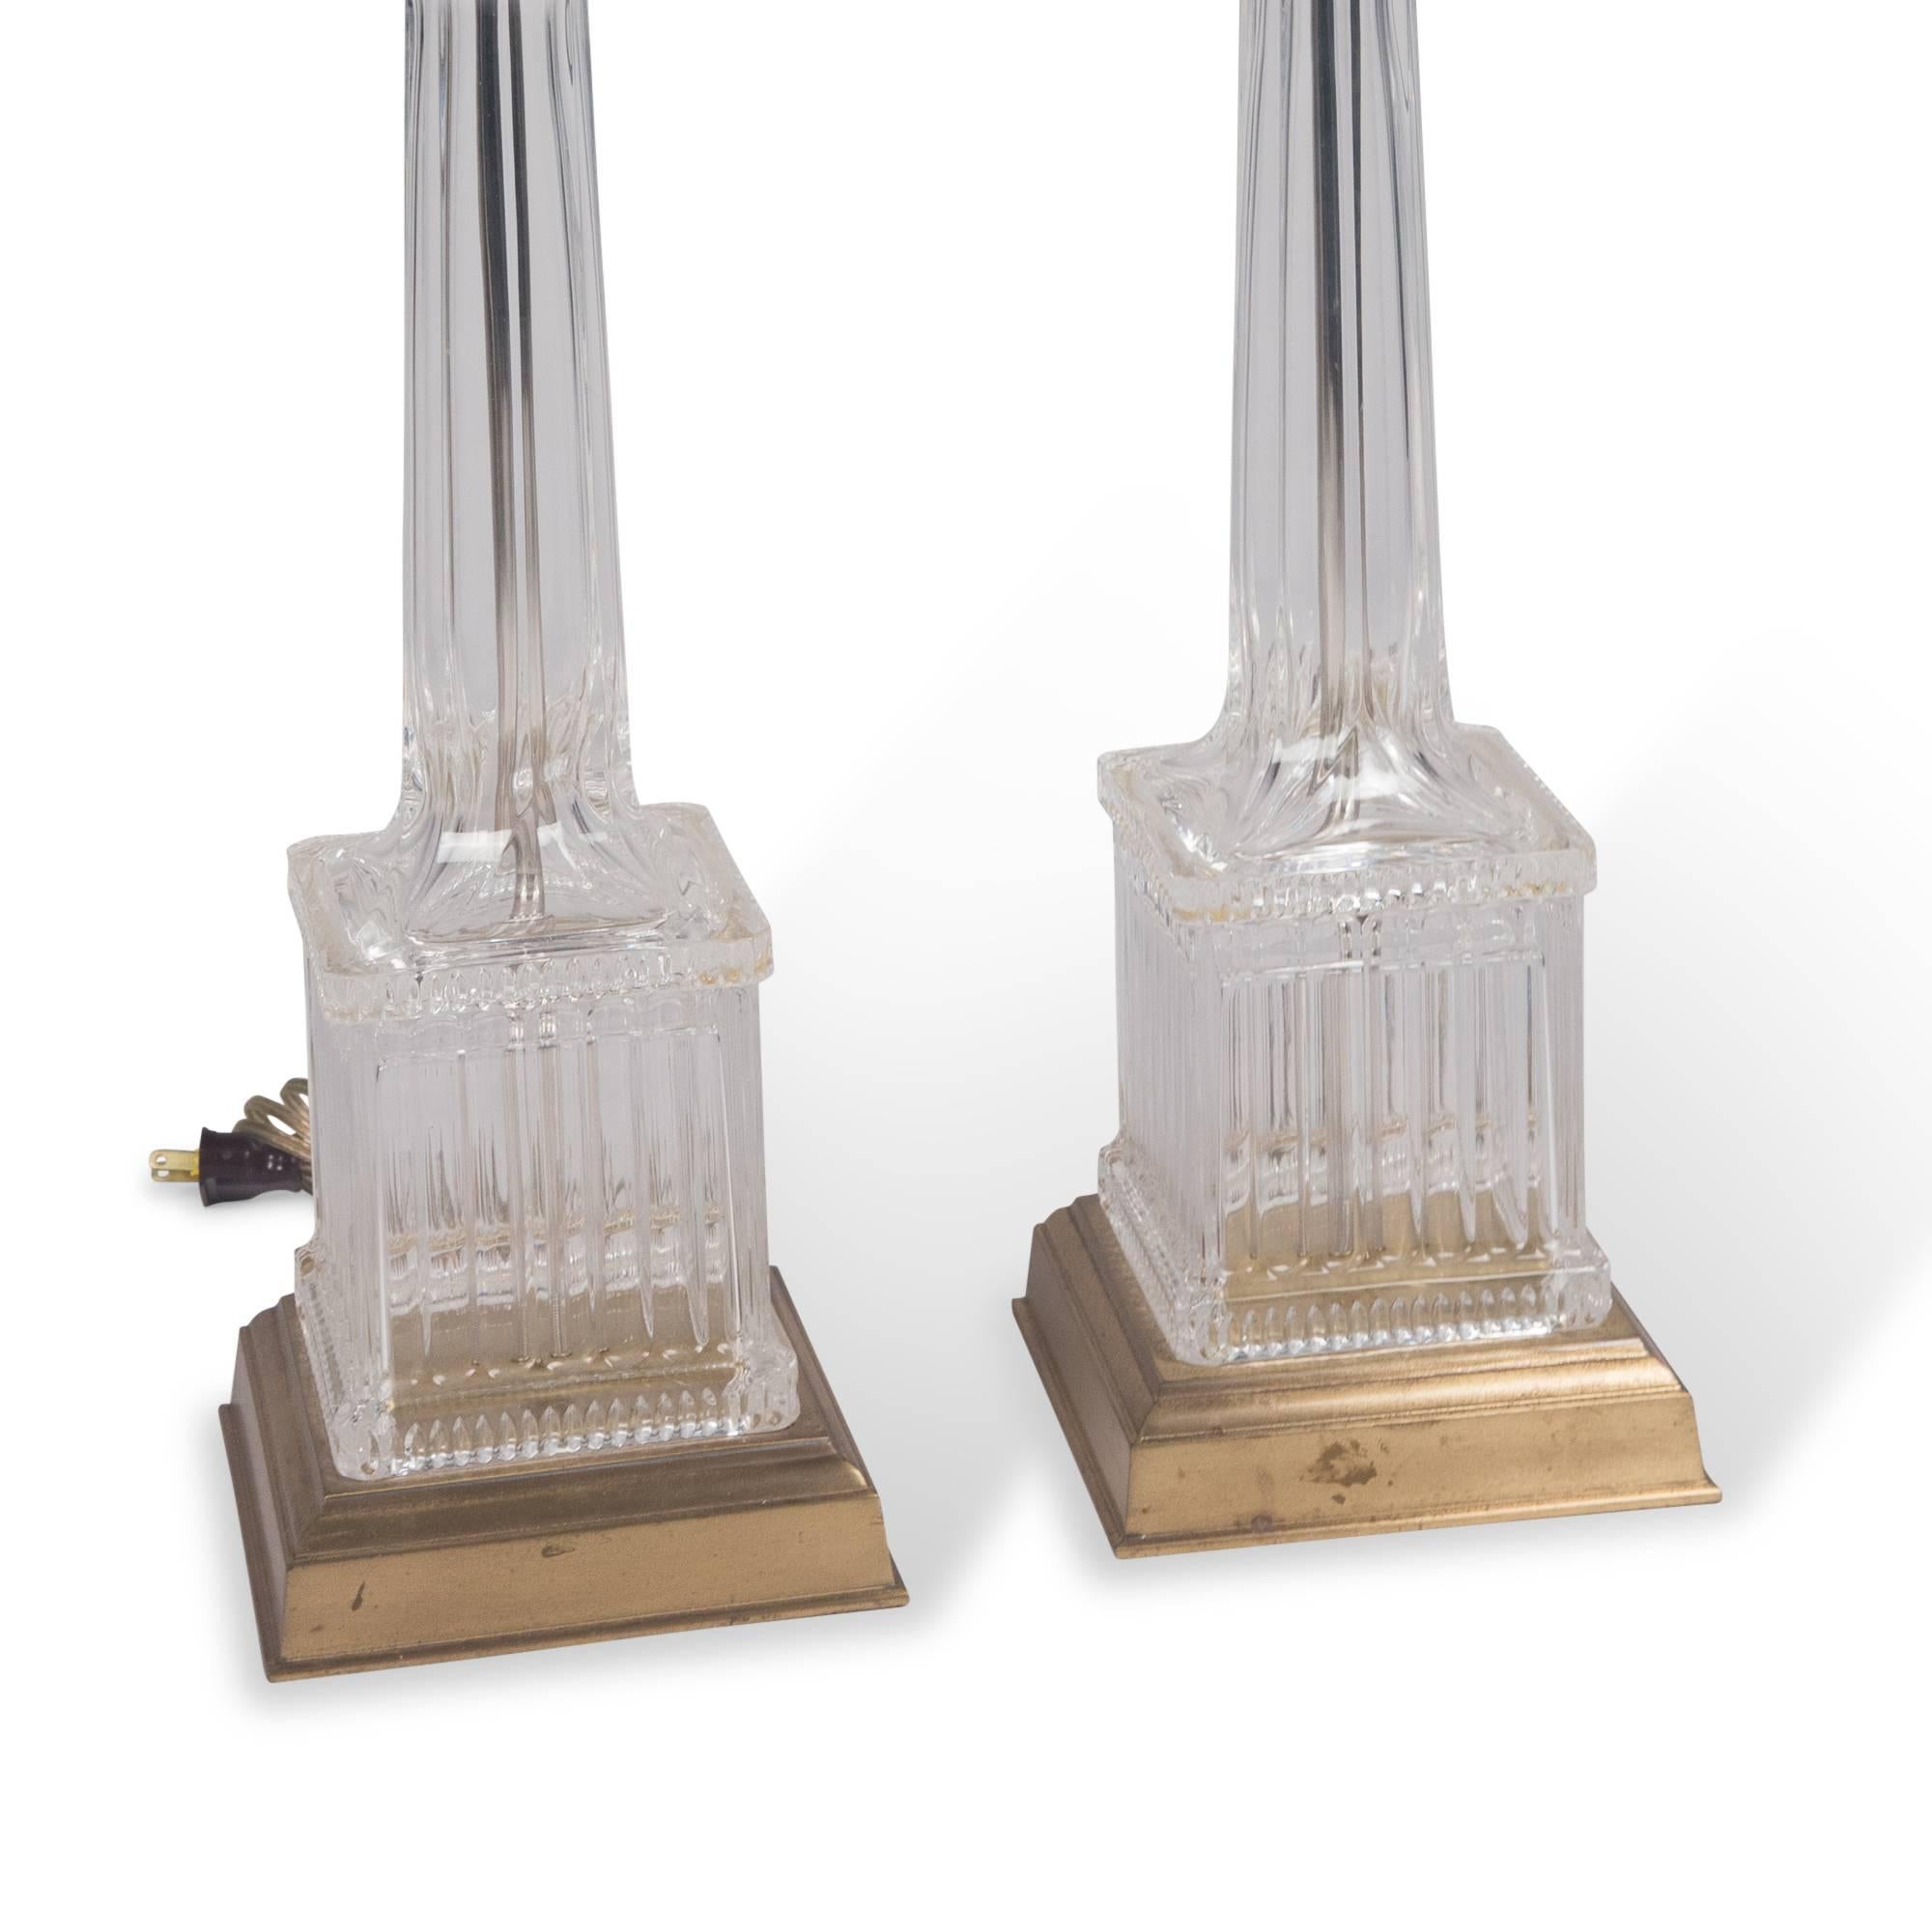 Fluted clear cast glass table lamps, rounded column-form on square base, the glass portion mounted on square brass base, with square panel finial, by Chapman, United States, 1960s. Measures: Height to top of finial 33 in, height to top of socket 23